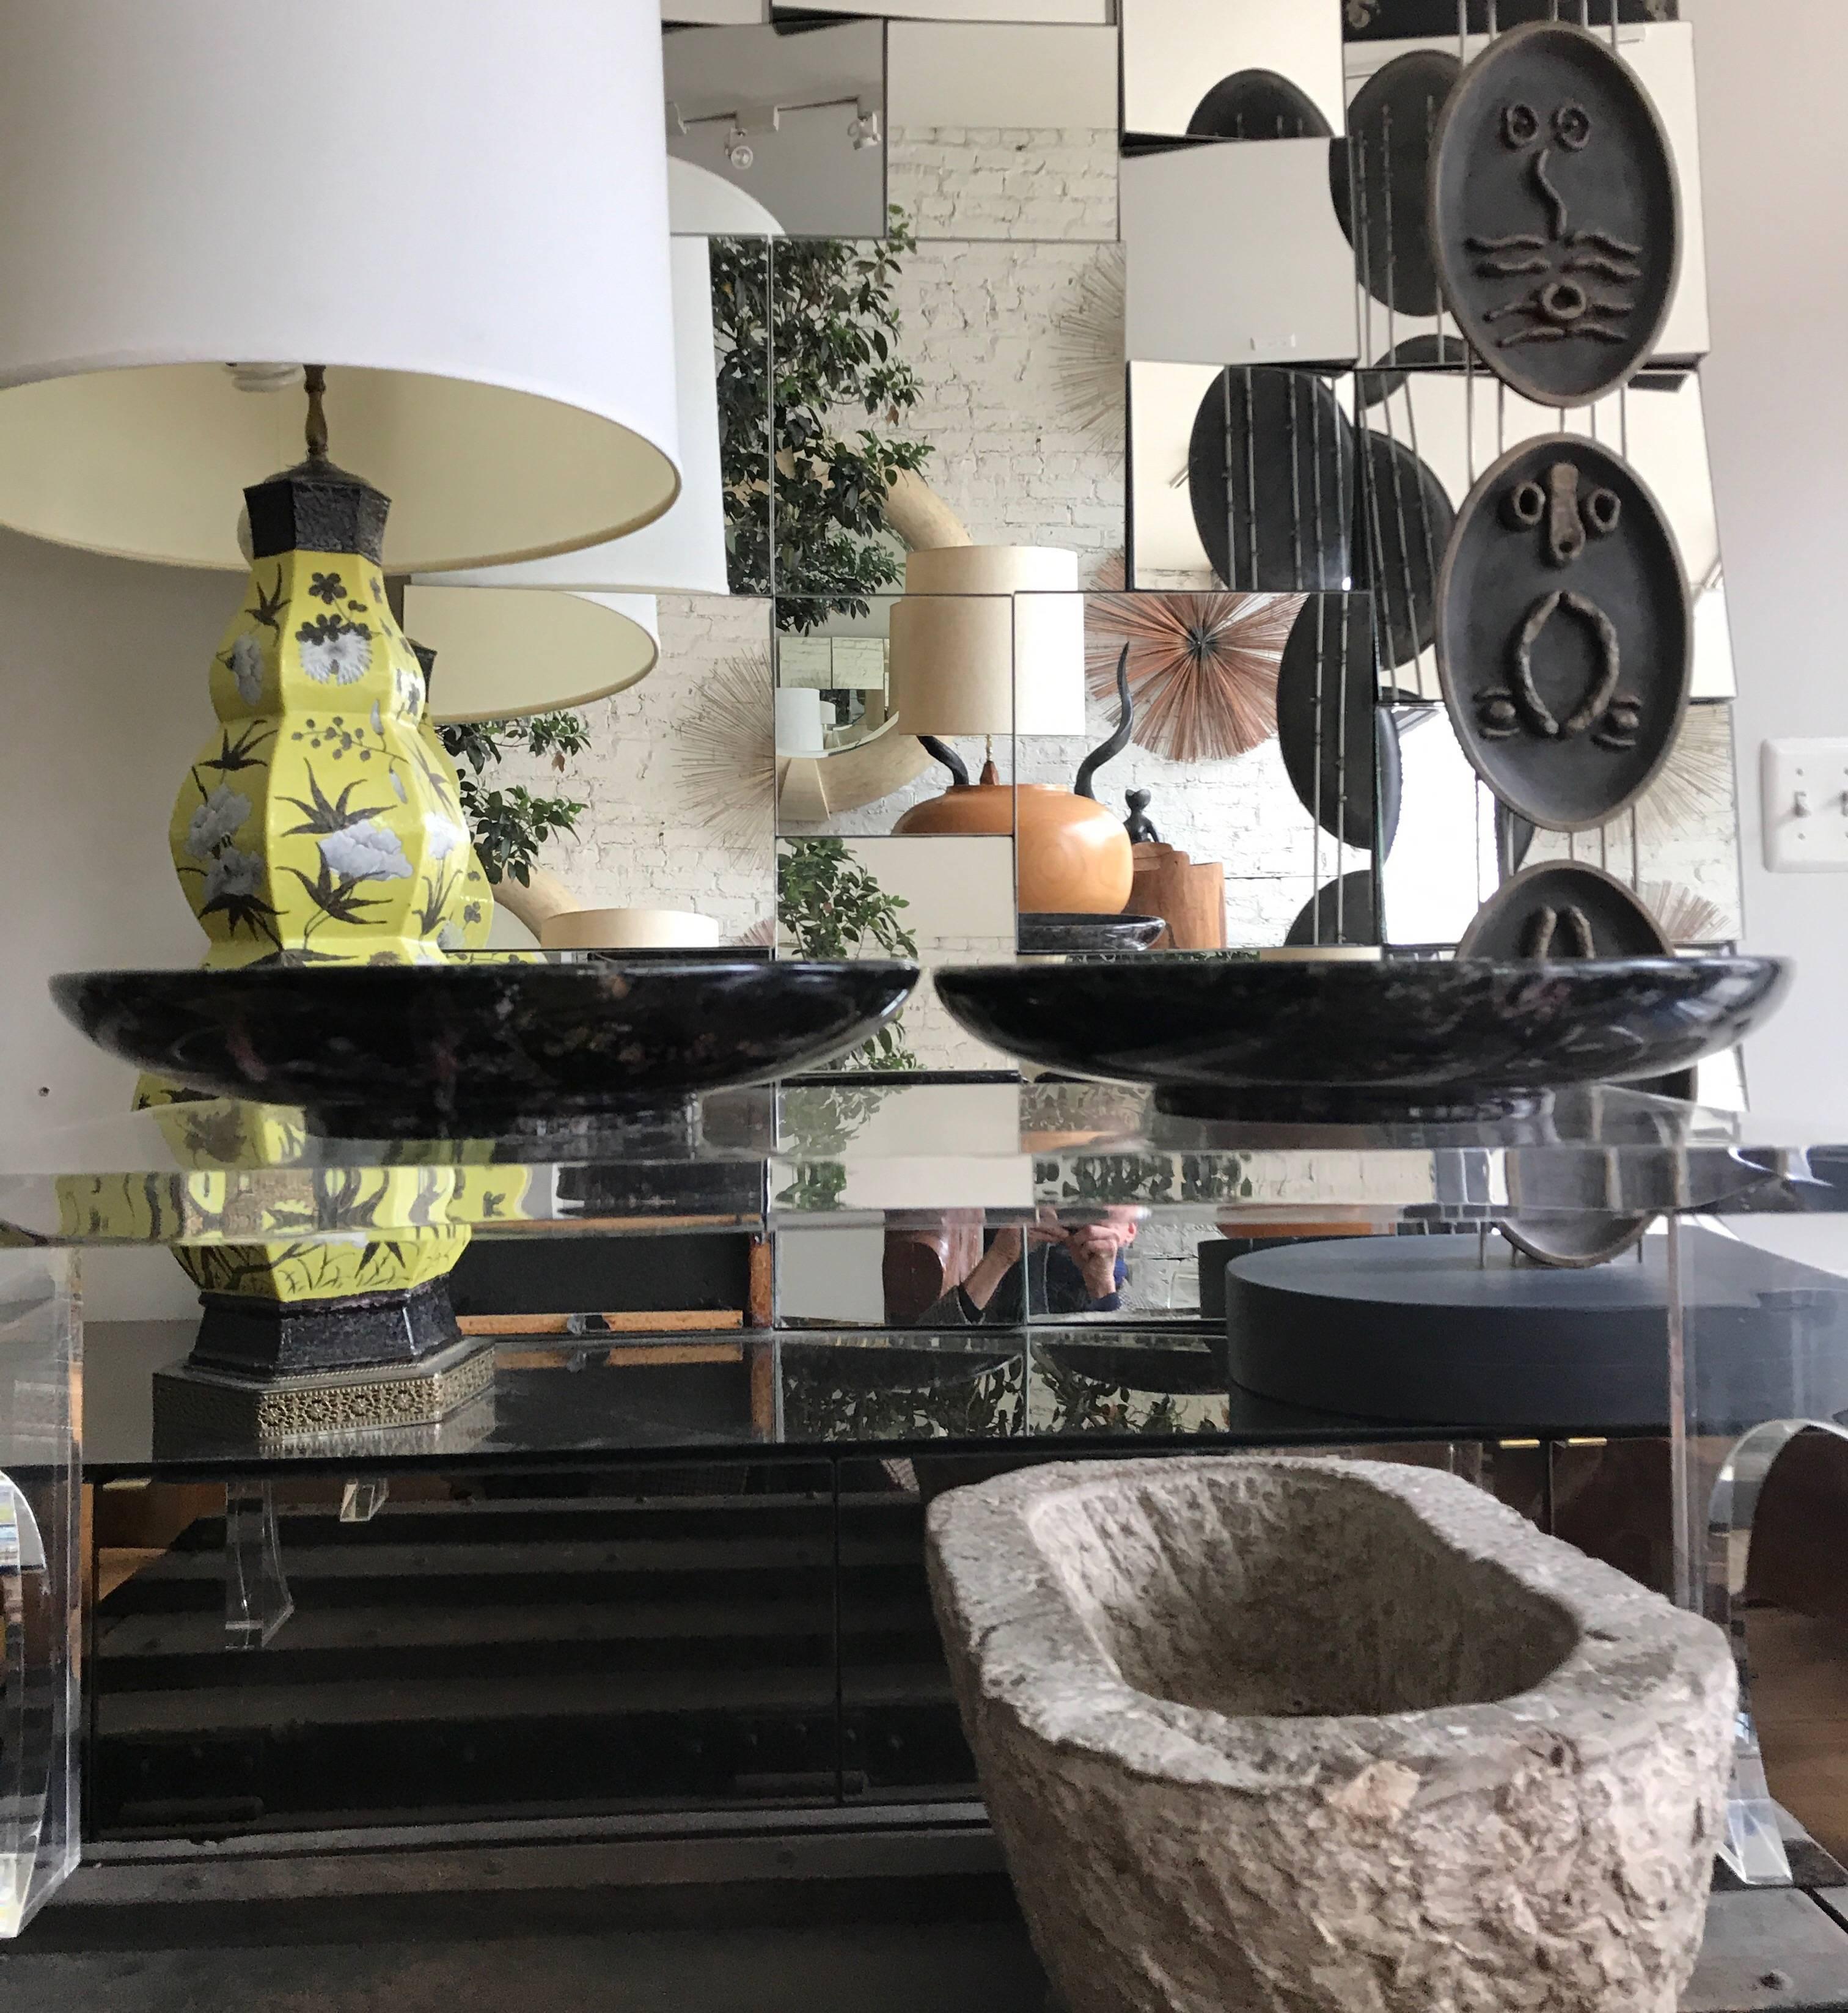 An elegant pair of richly veined black Italian marble centrepiece bowls by Up & Up.
Wonderful Mid-Century Modern tabletop decorative object. The price is for the pair.